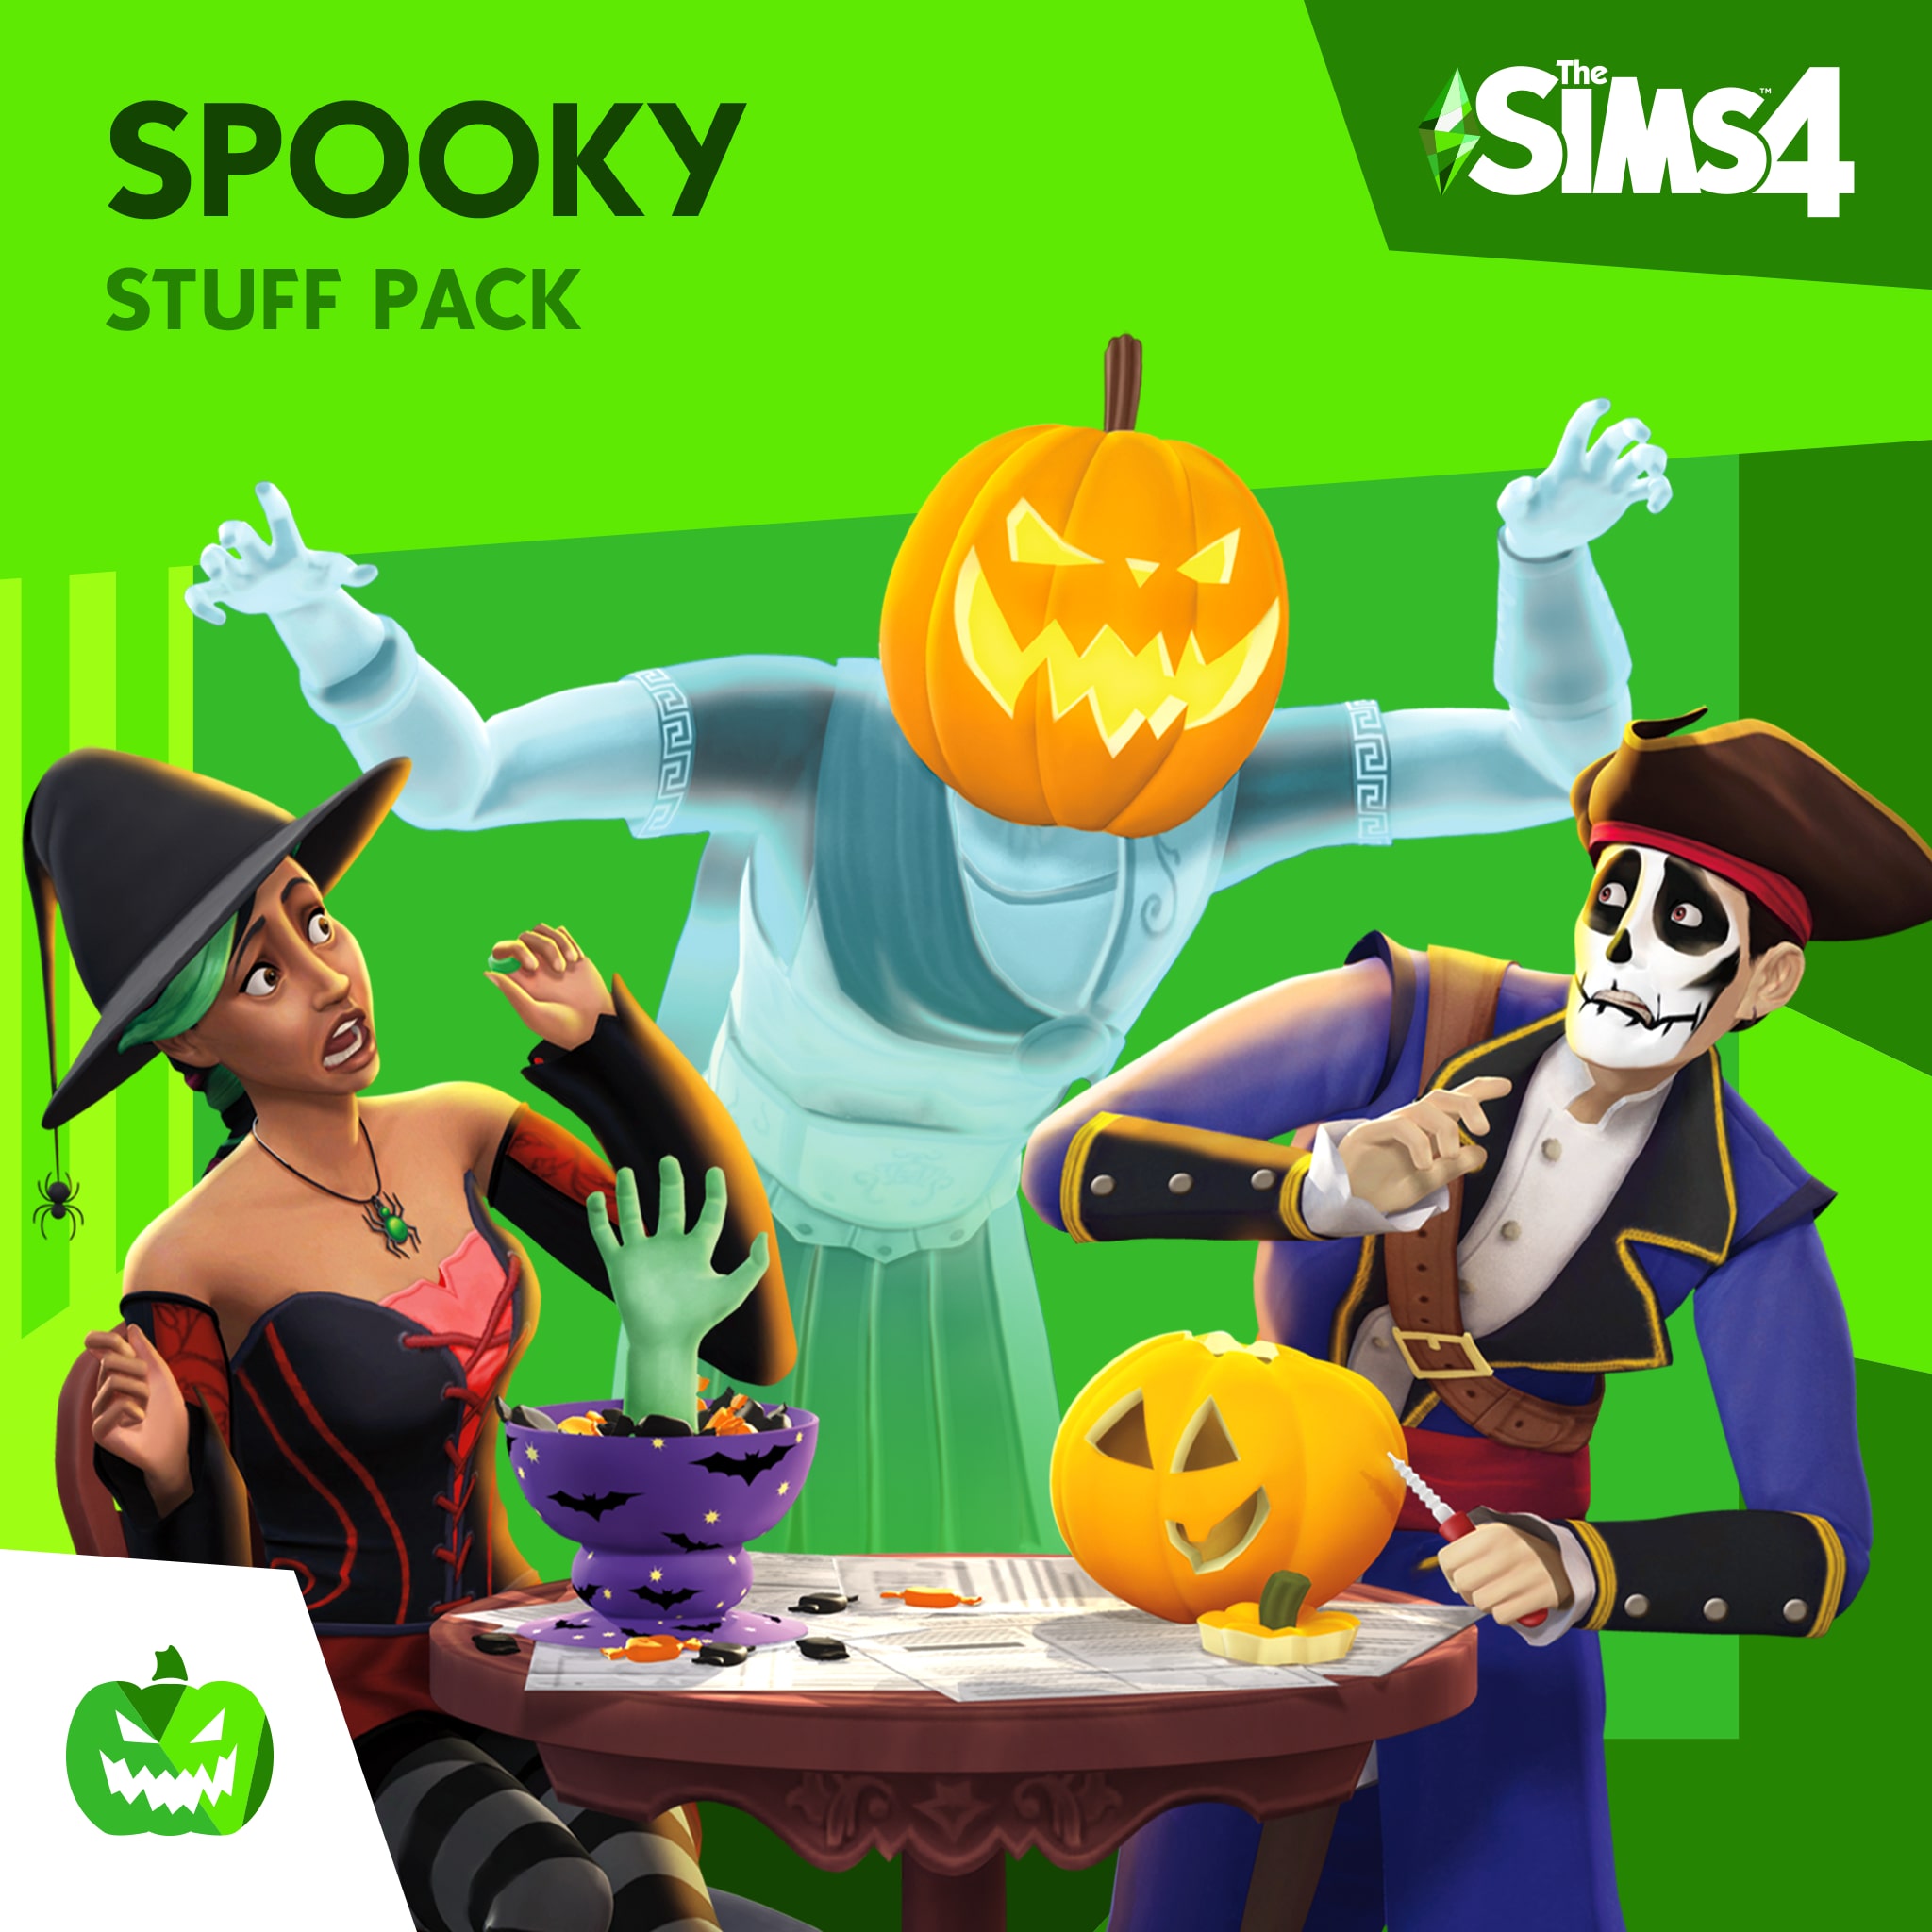 The Sims™ 4 Spooky Stuff